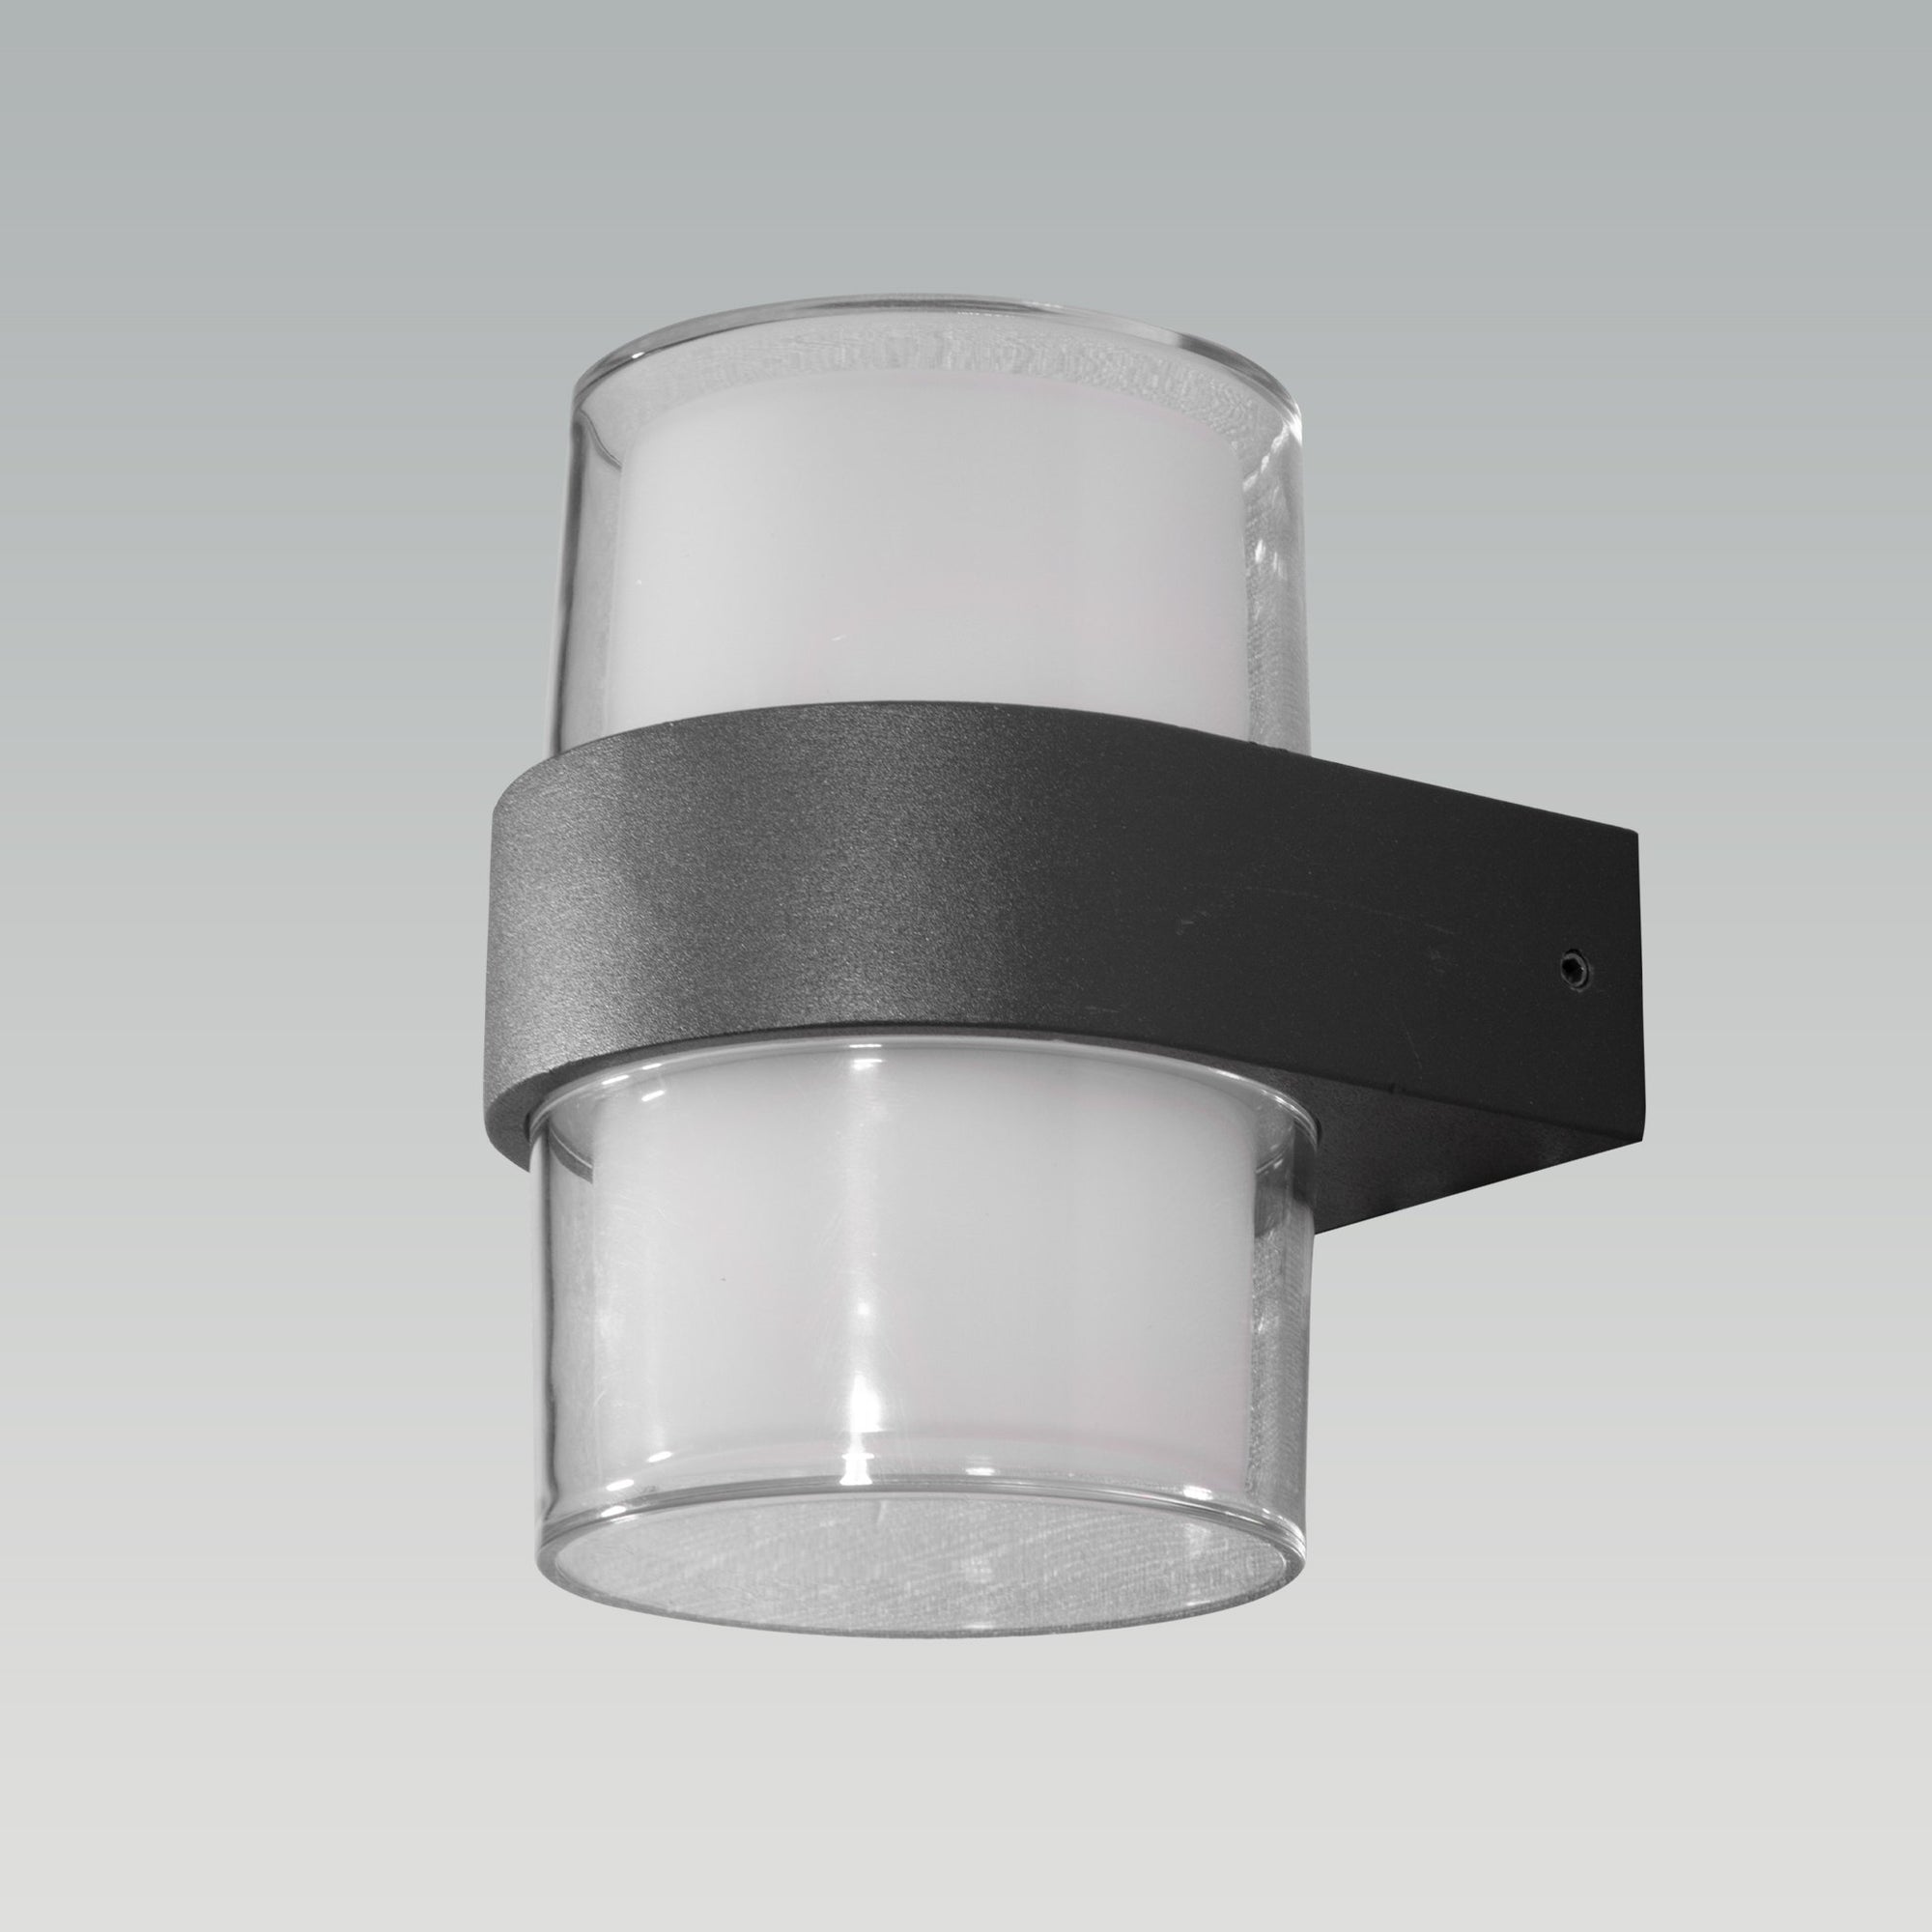 Shop Vision Round LED Outdoor Wall Light online